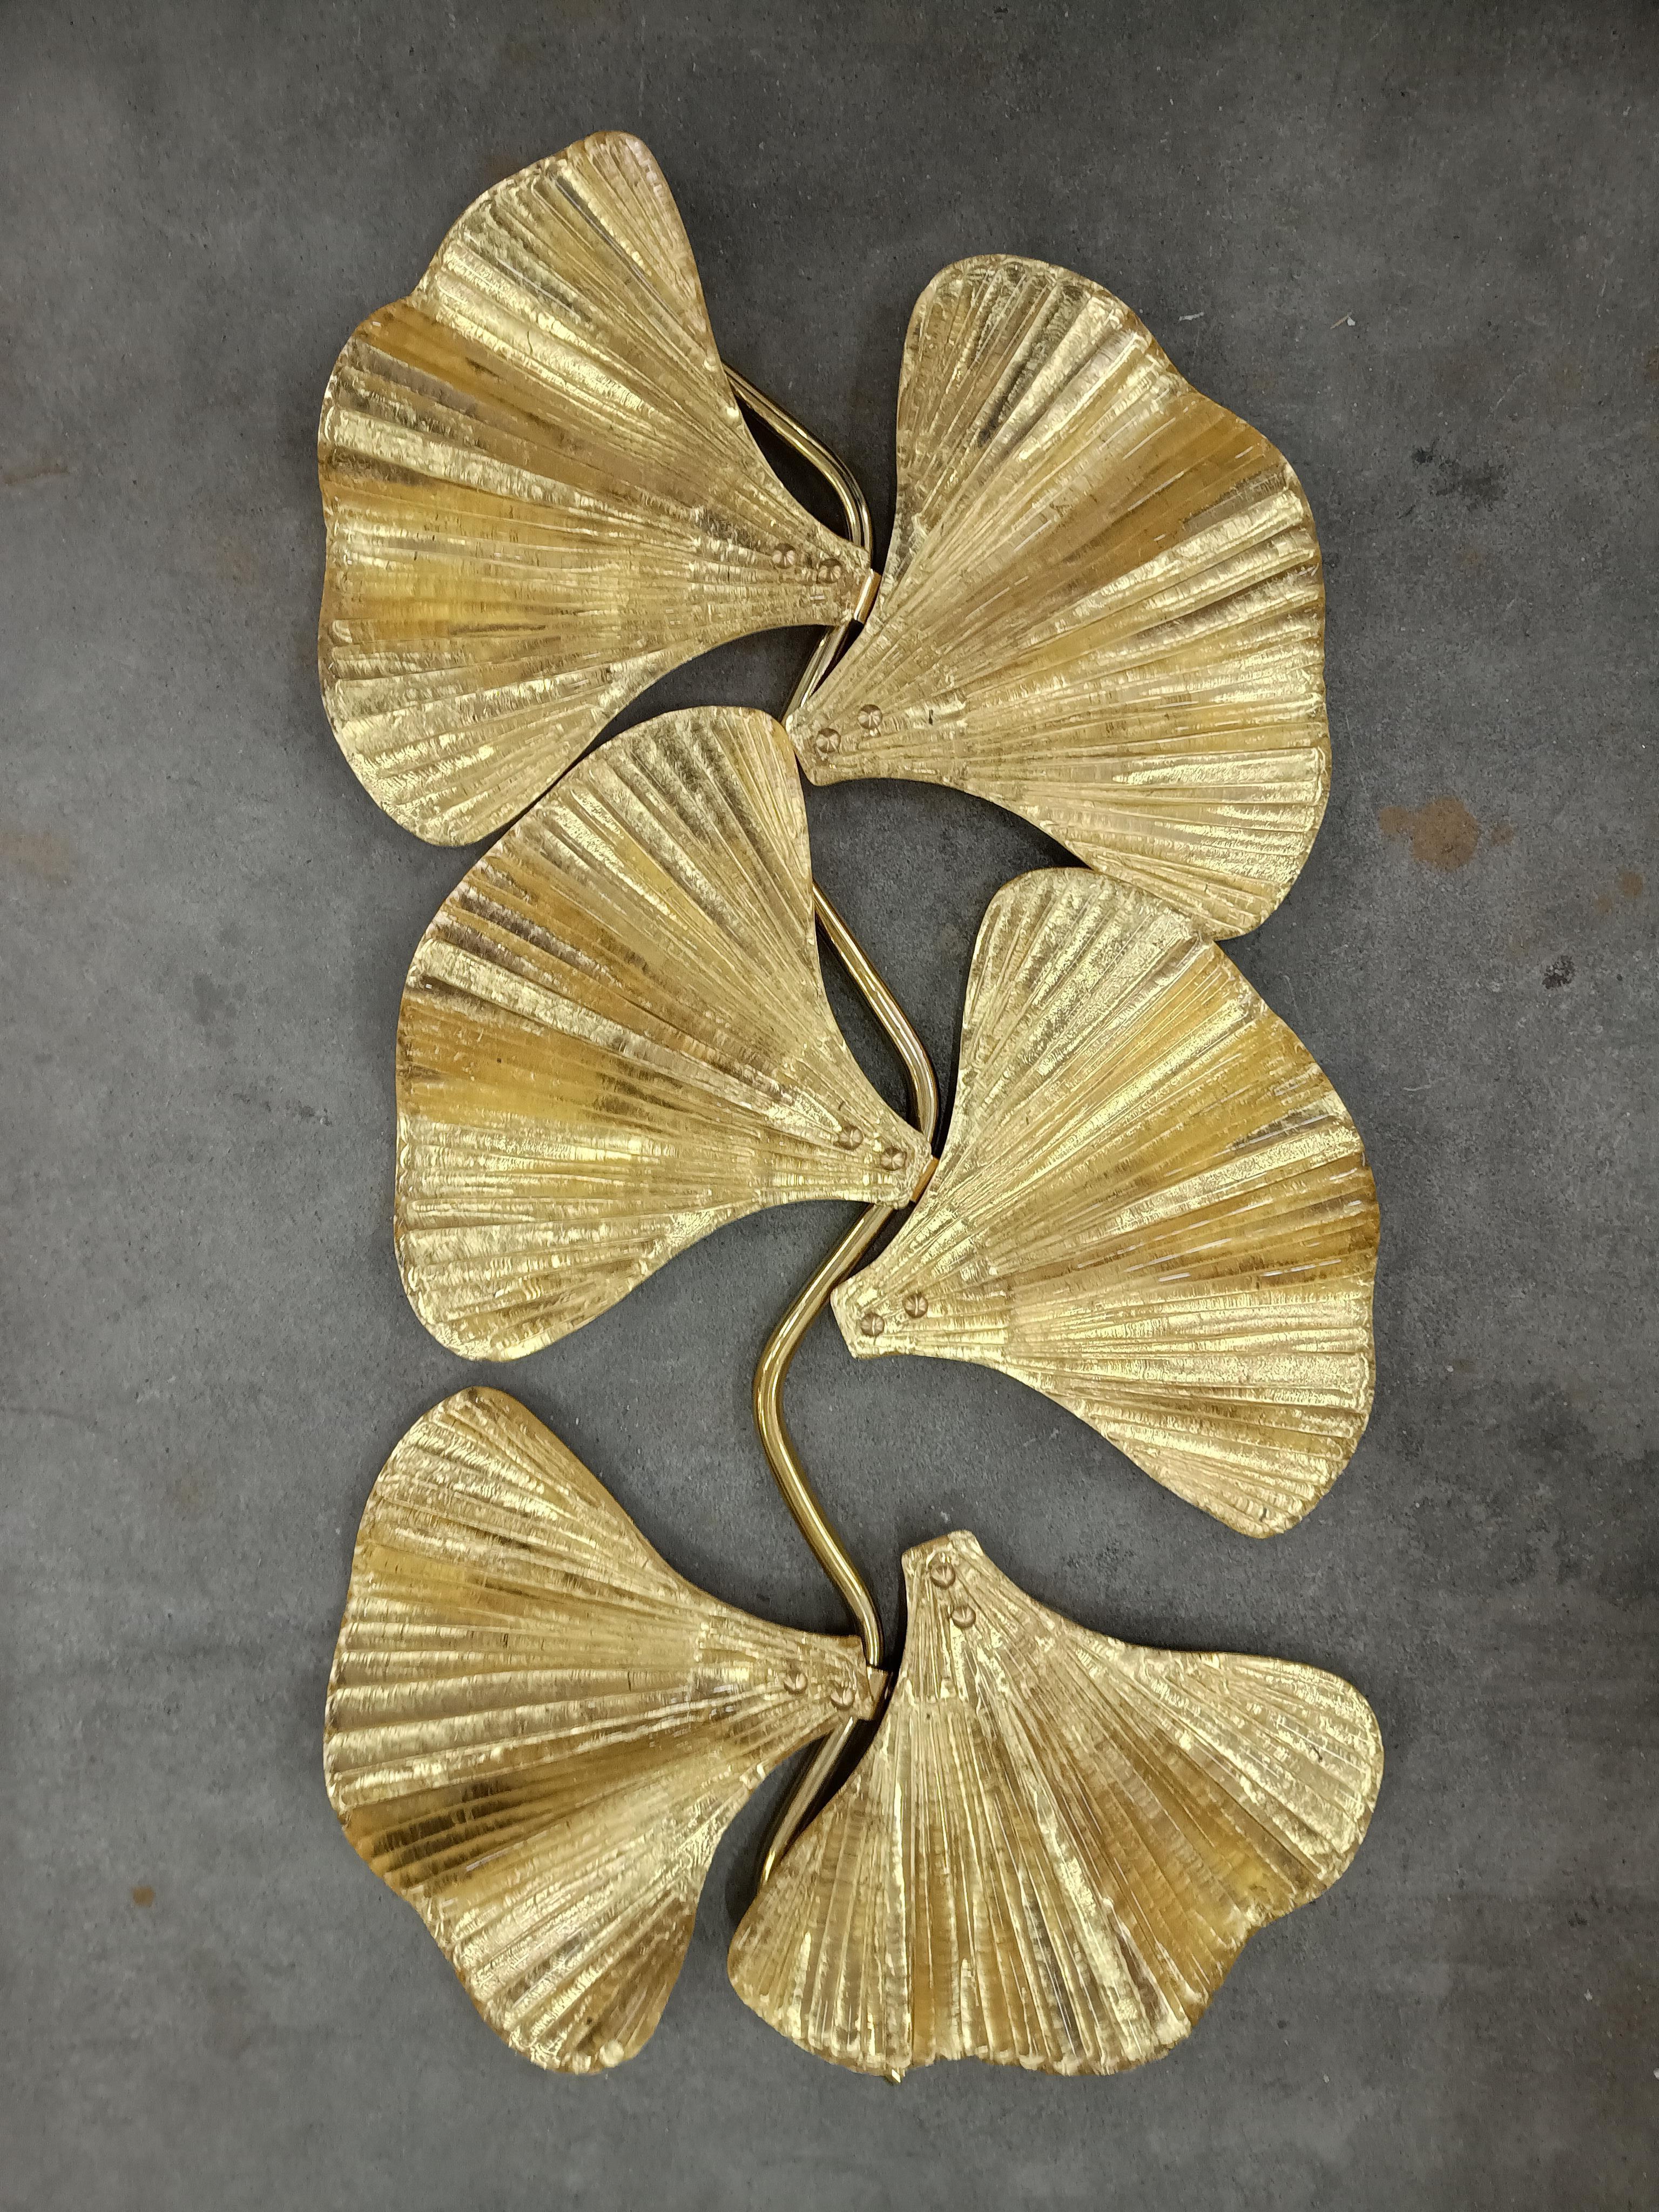 This bewitching narrow and long wall lamp was made entirely by hand in Murano. Every single leaf is made individually by hand in high quality blown glass in Murano; which is why each leaf is slightly different from the next. Exhilarating color, rich